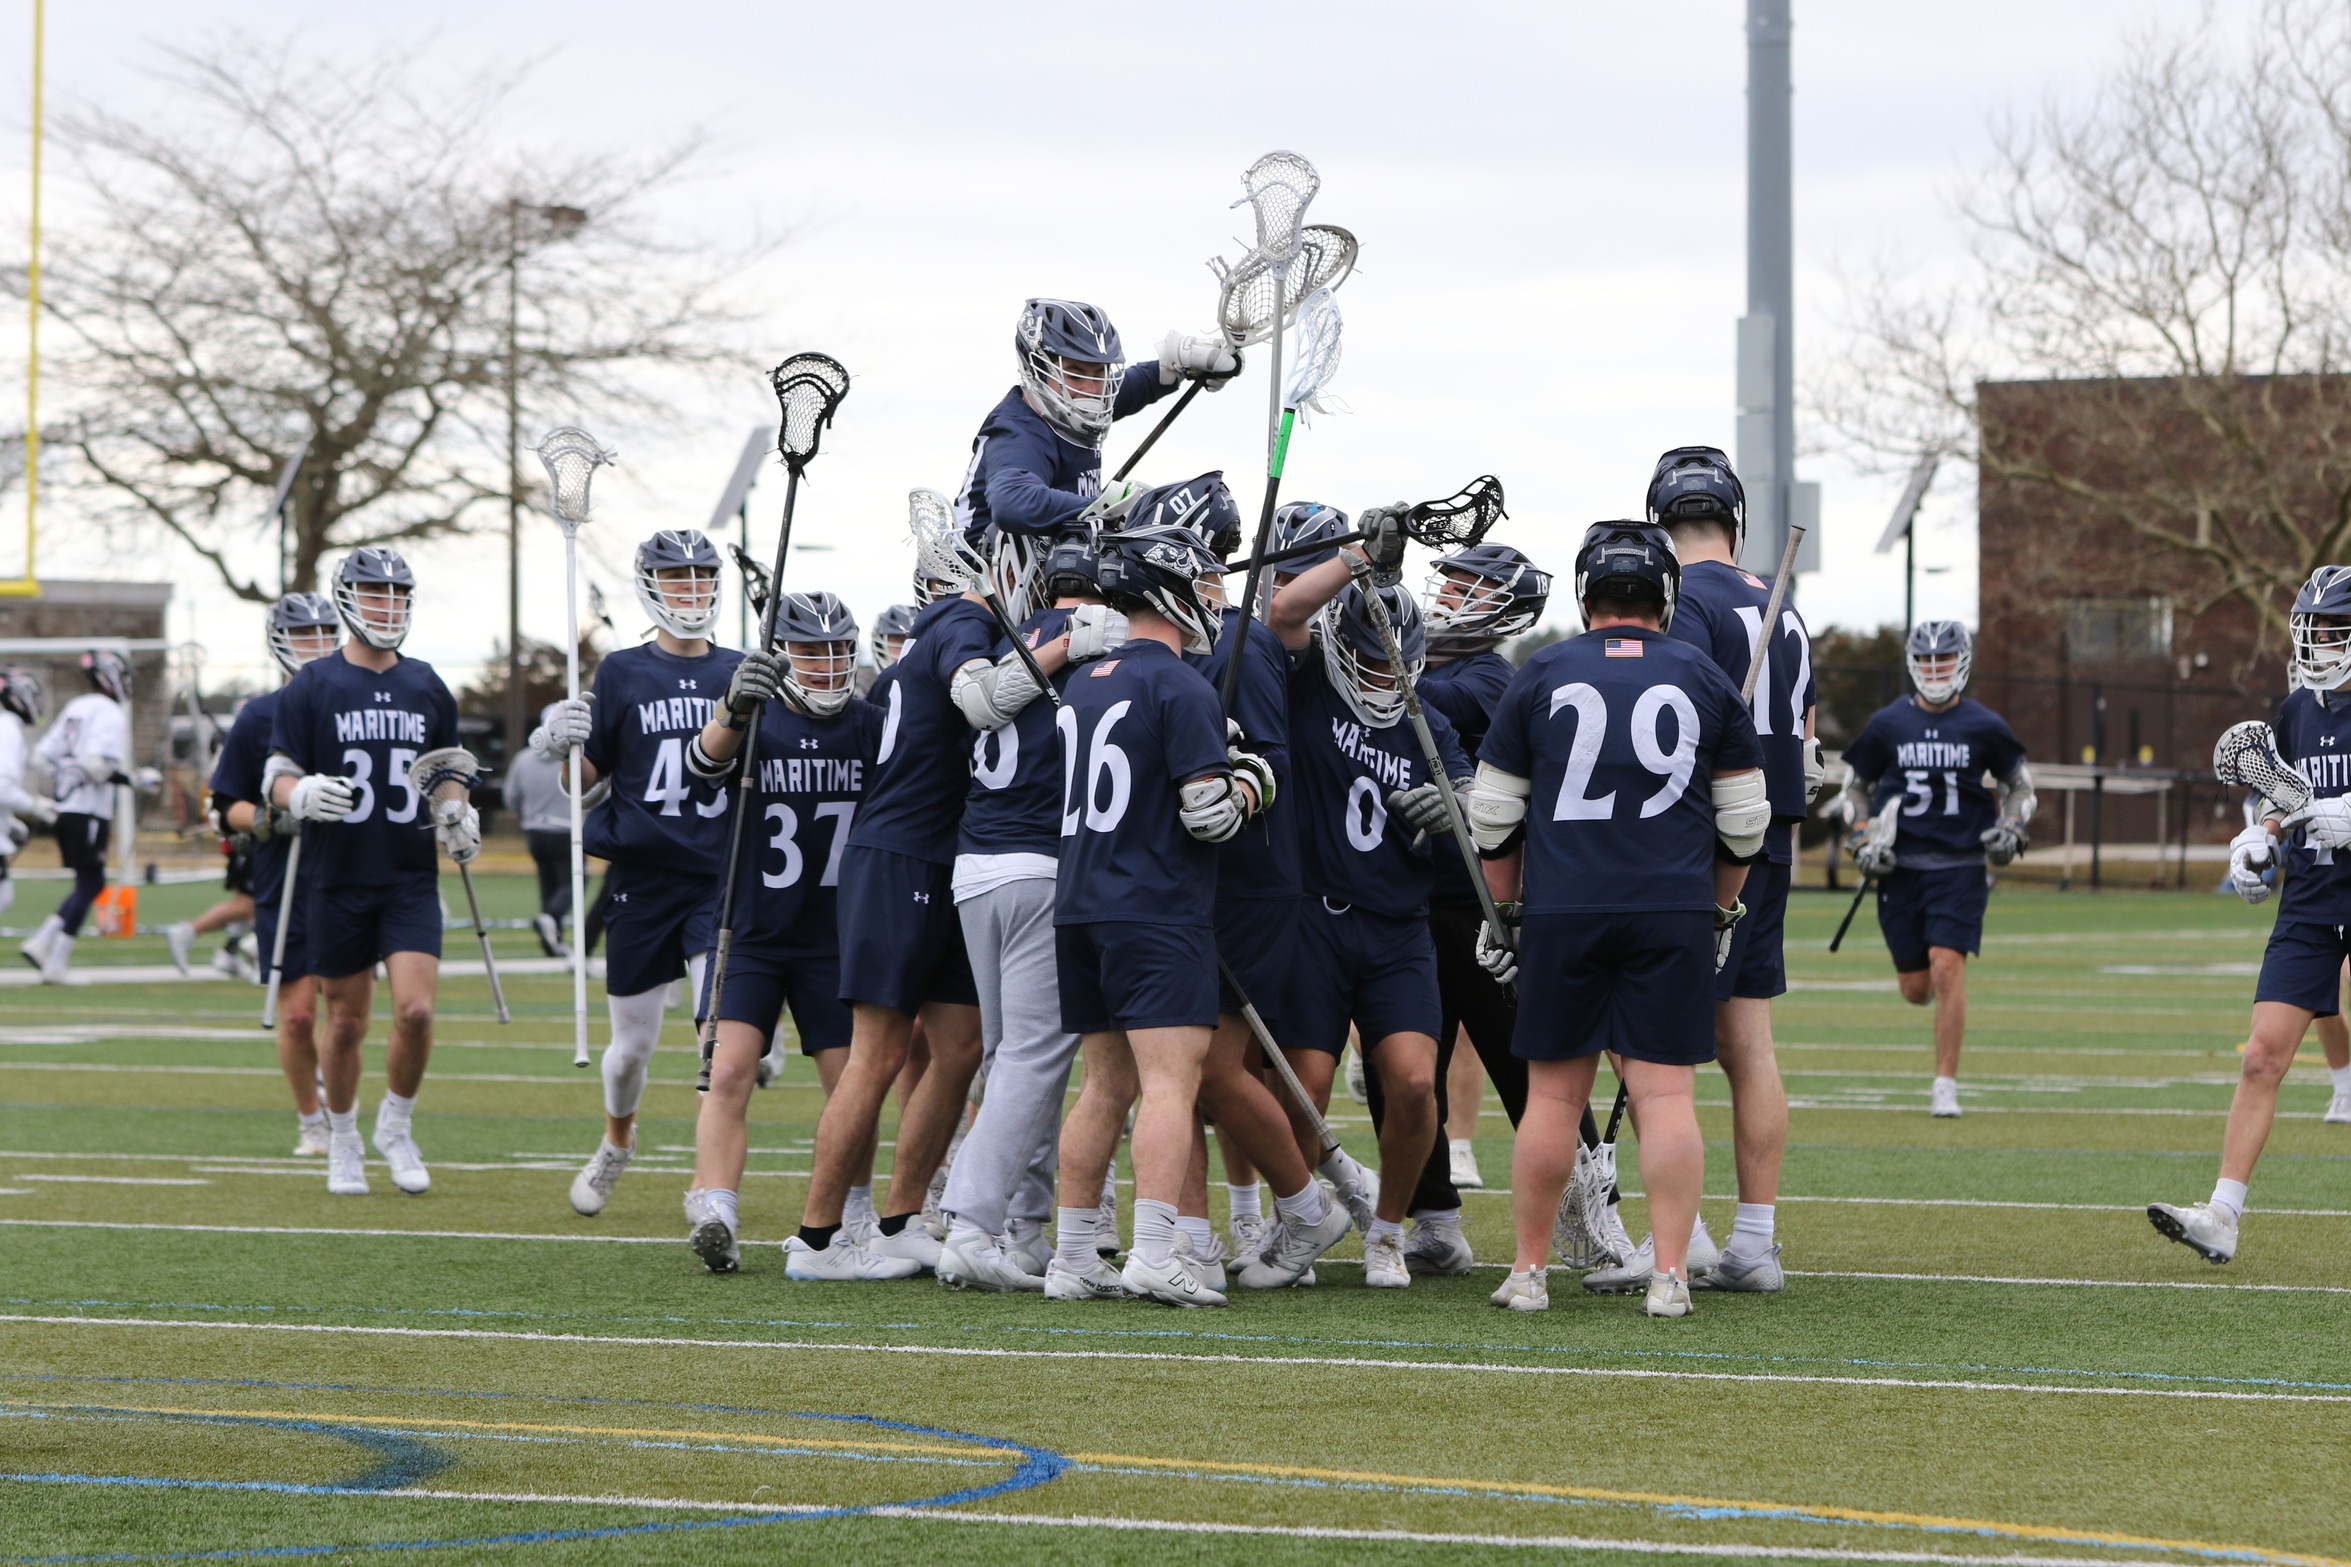 Men's Lax Improves to 2-1 with Win over Manhattanville